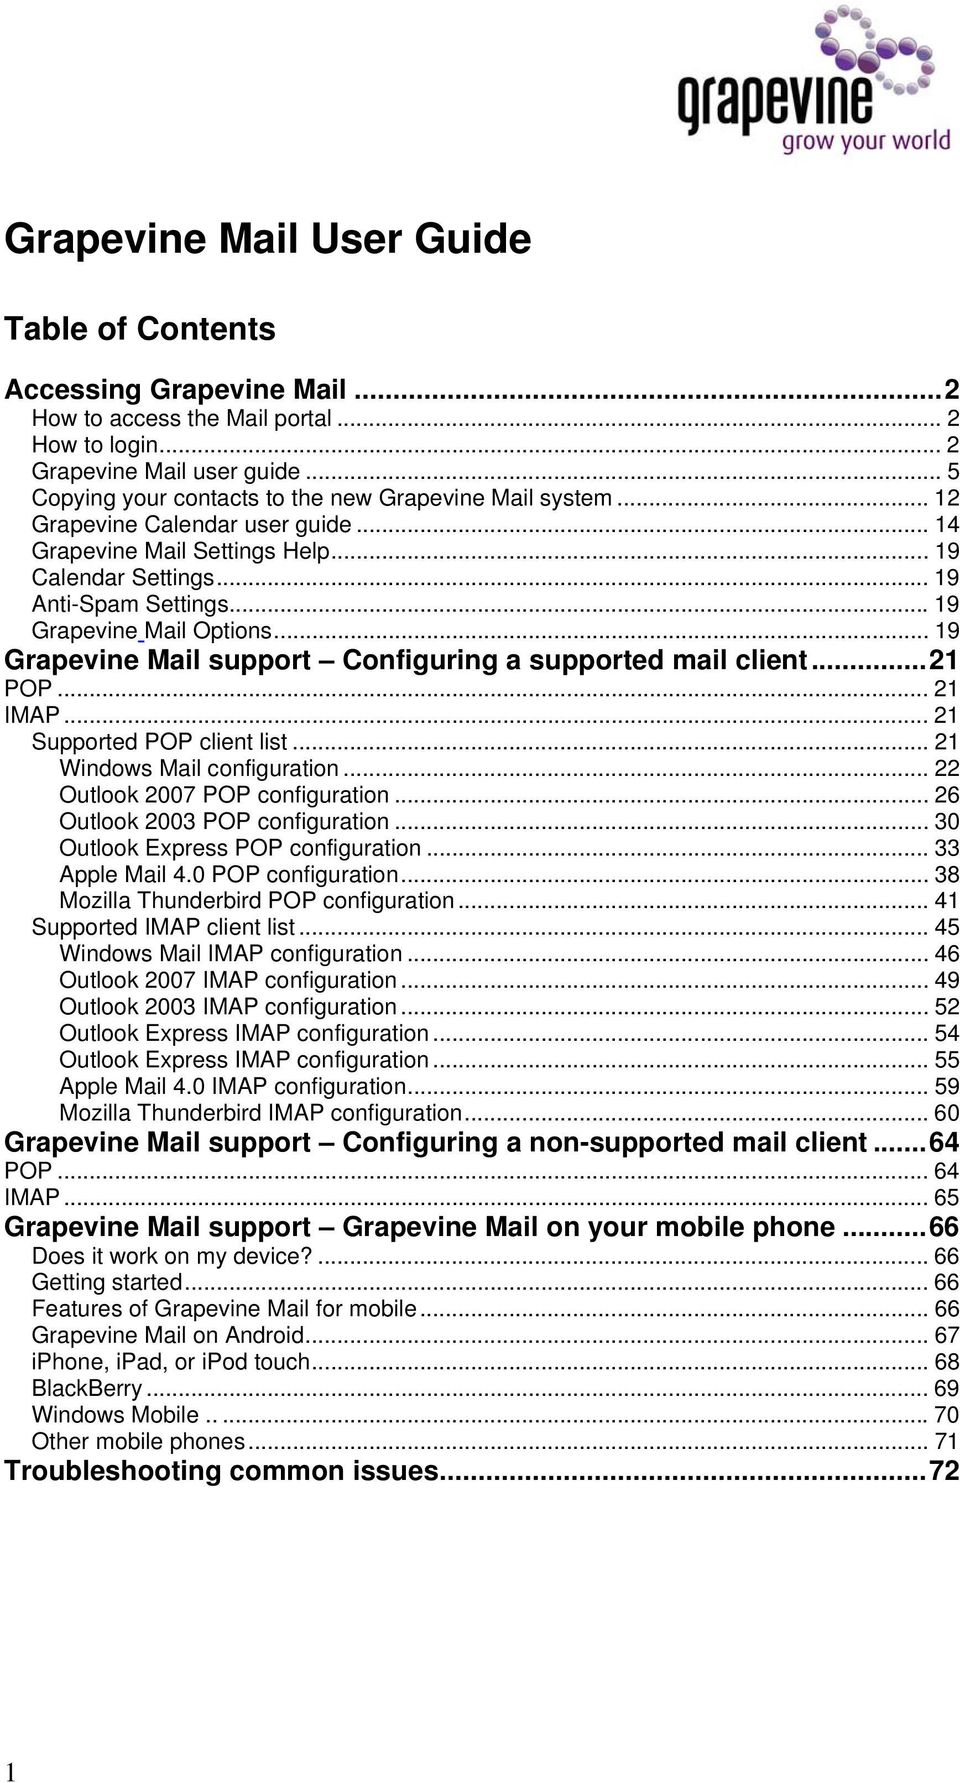 ..19 Grapevine Mail Options... 19 Grapevine Mail support Configuring a supported mail client...21 POP... 21 IMAP... 21 Supported POP client list... 21 Windows Mail configuration.